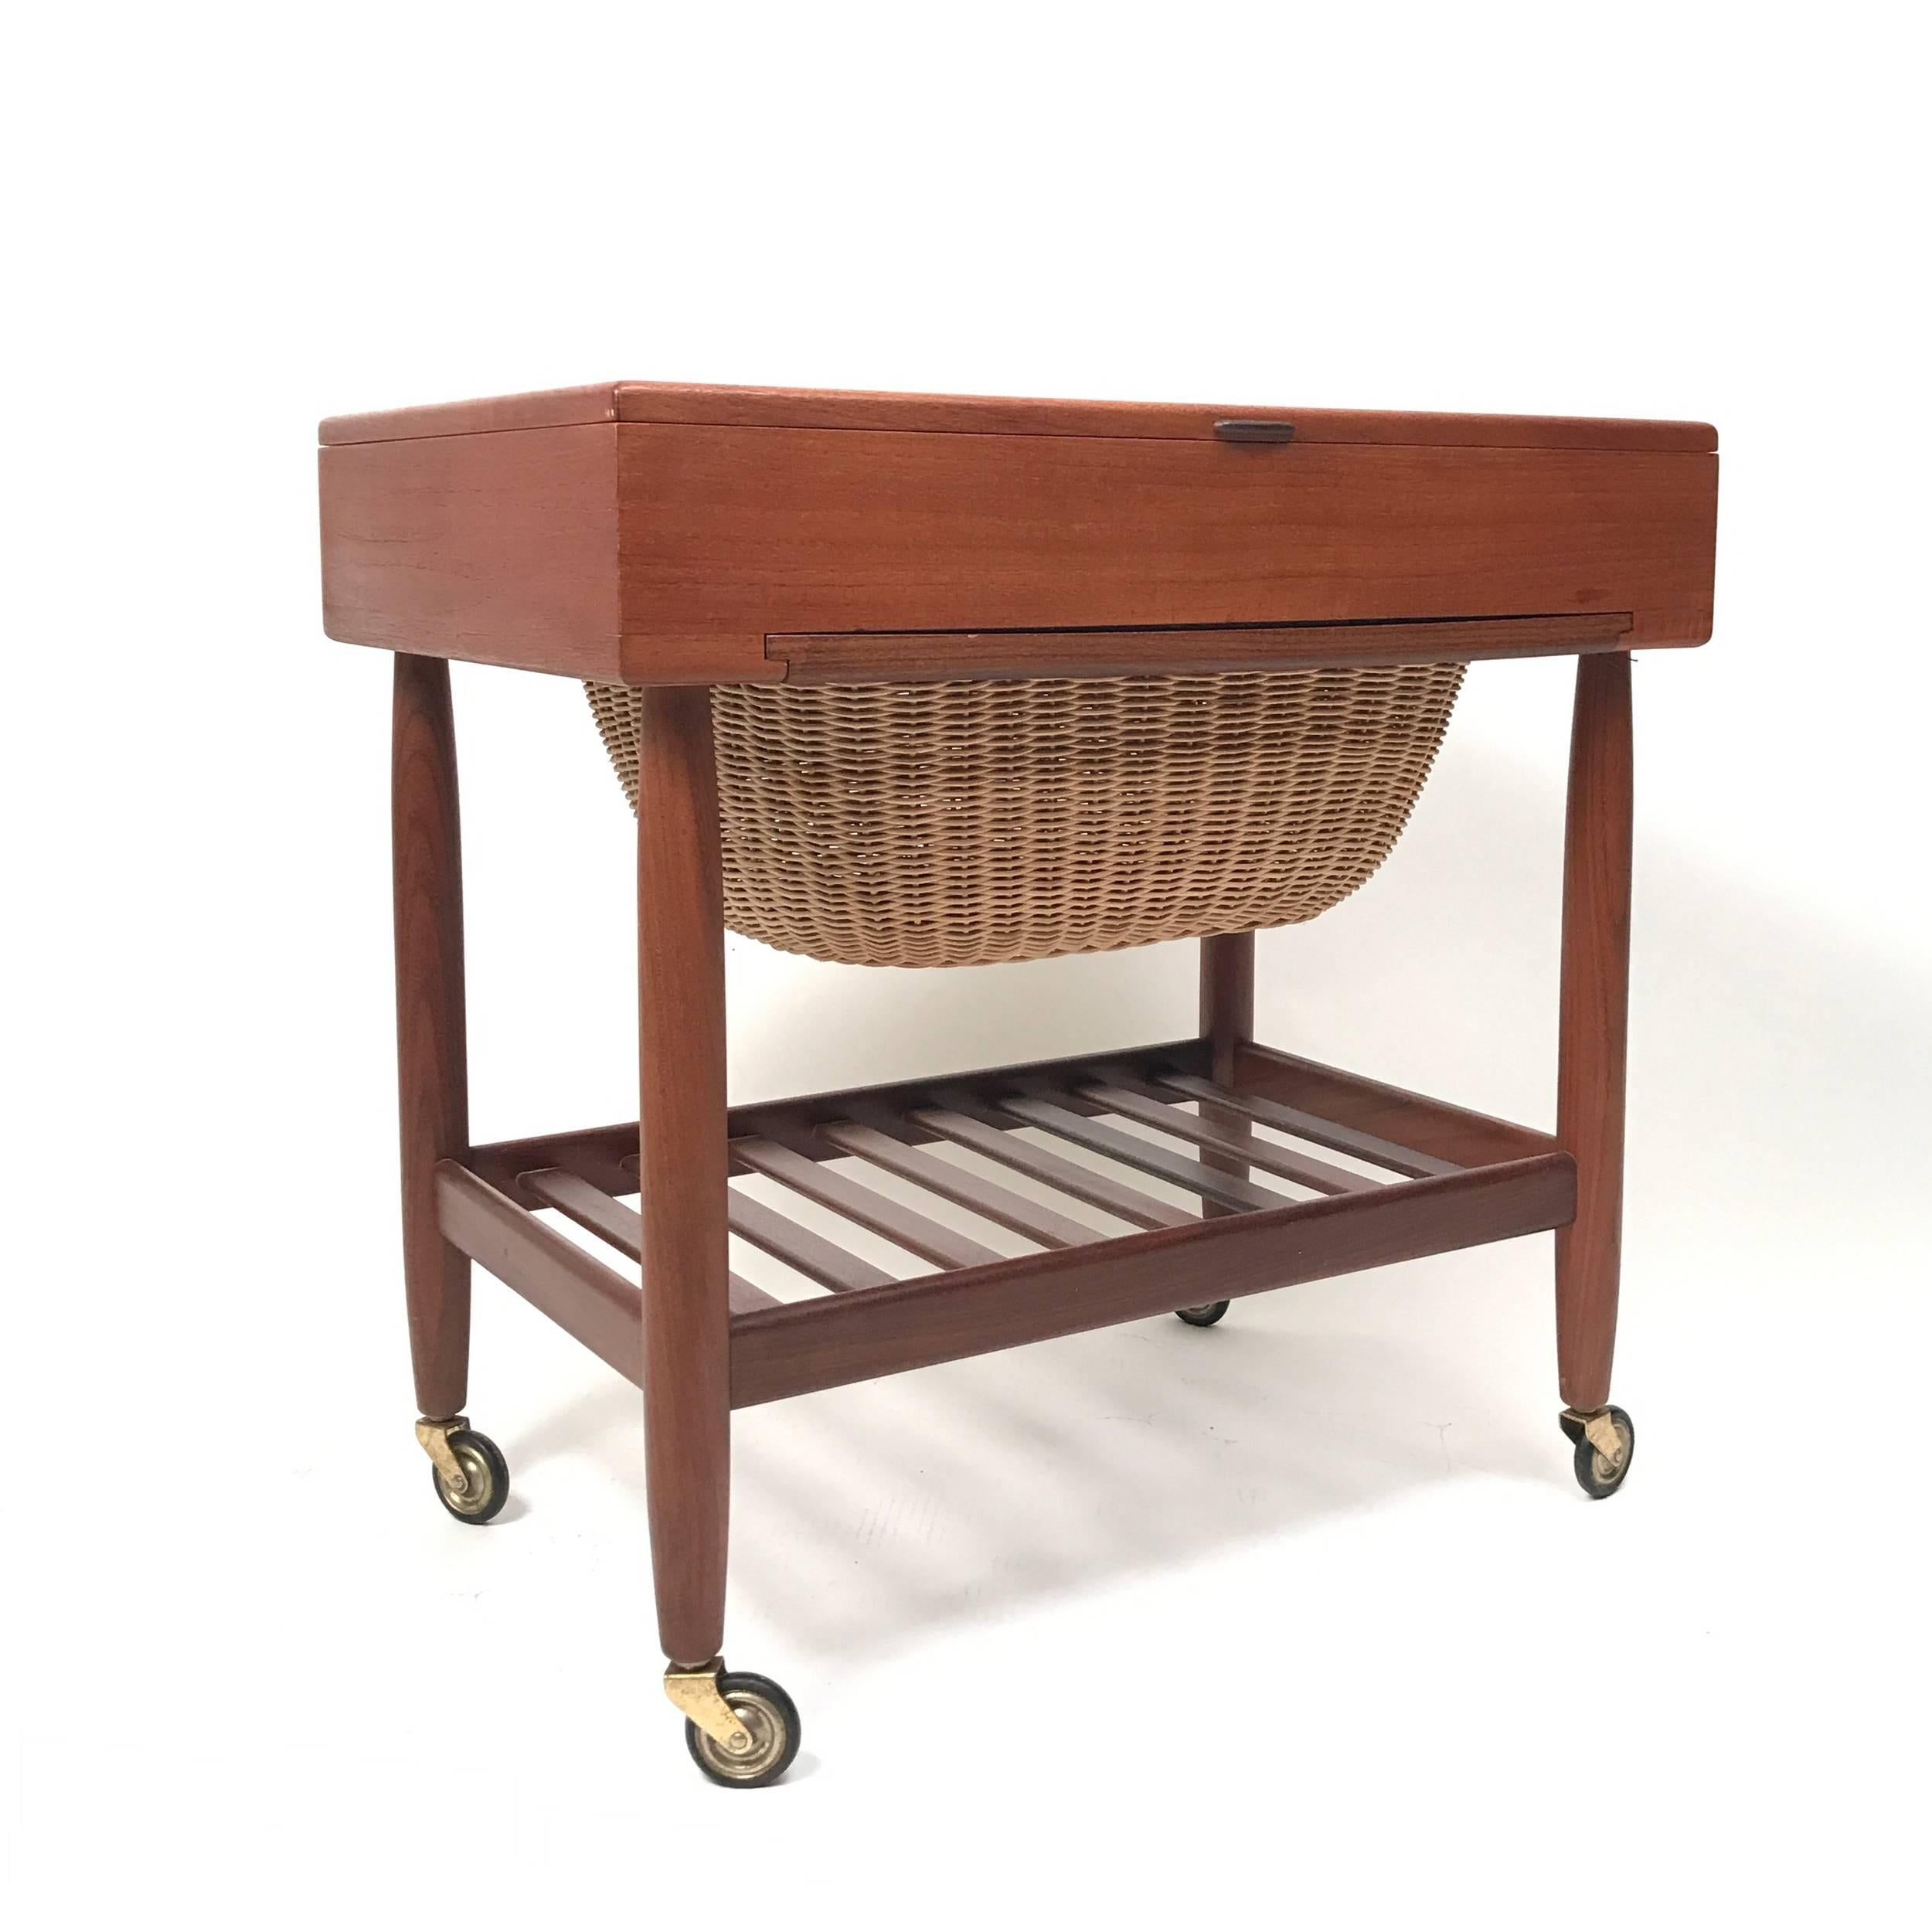 Really great sewing cart. Perfect for end table. Much storage under lift top and additional storage in basket drawer. Really great unique piece. Maker is FDB Mobler.